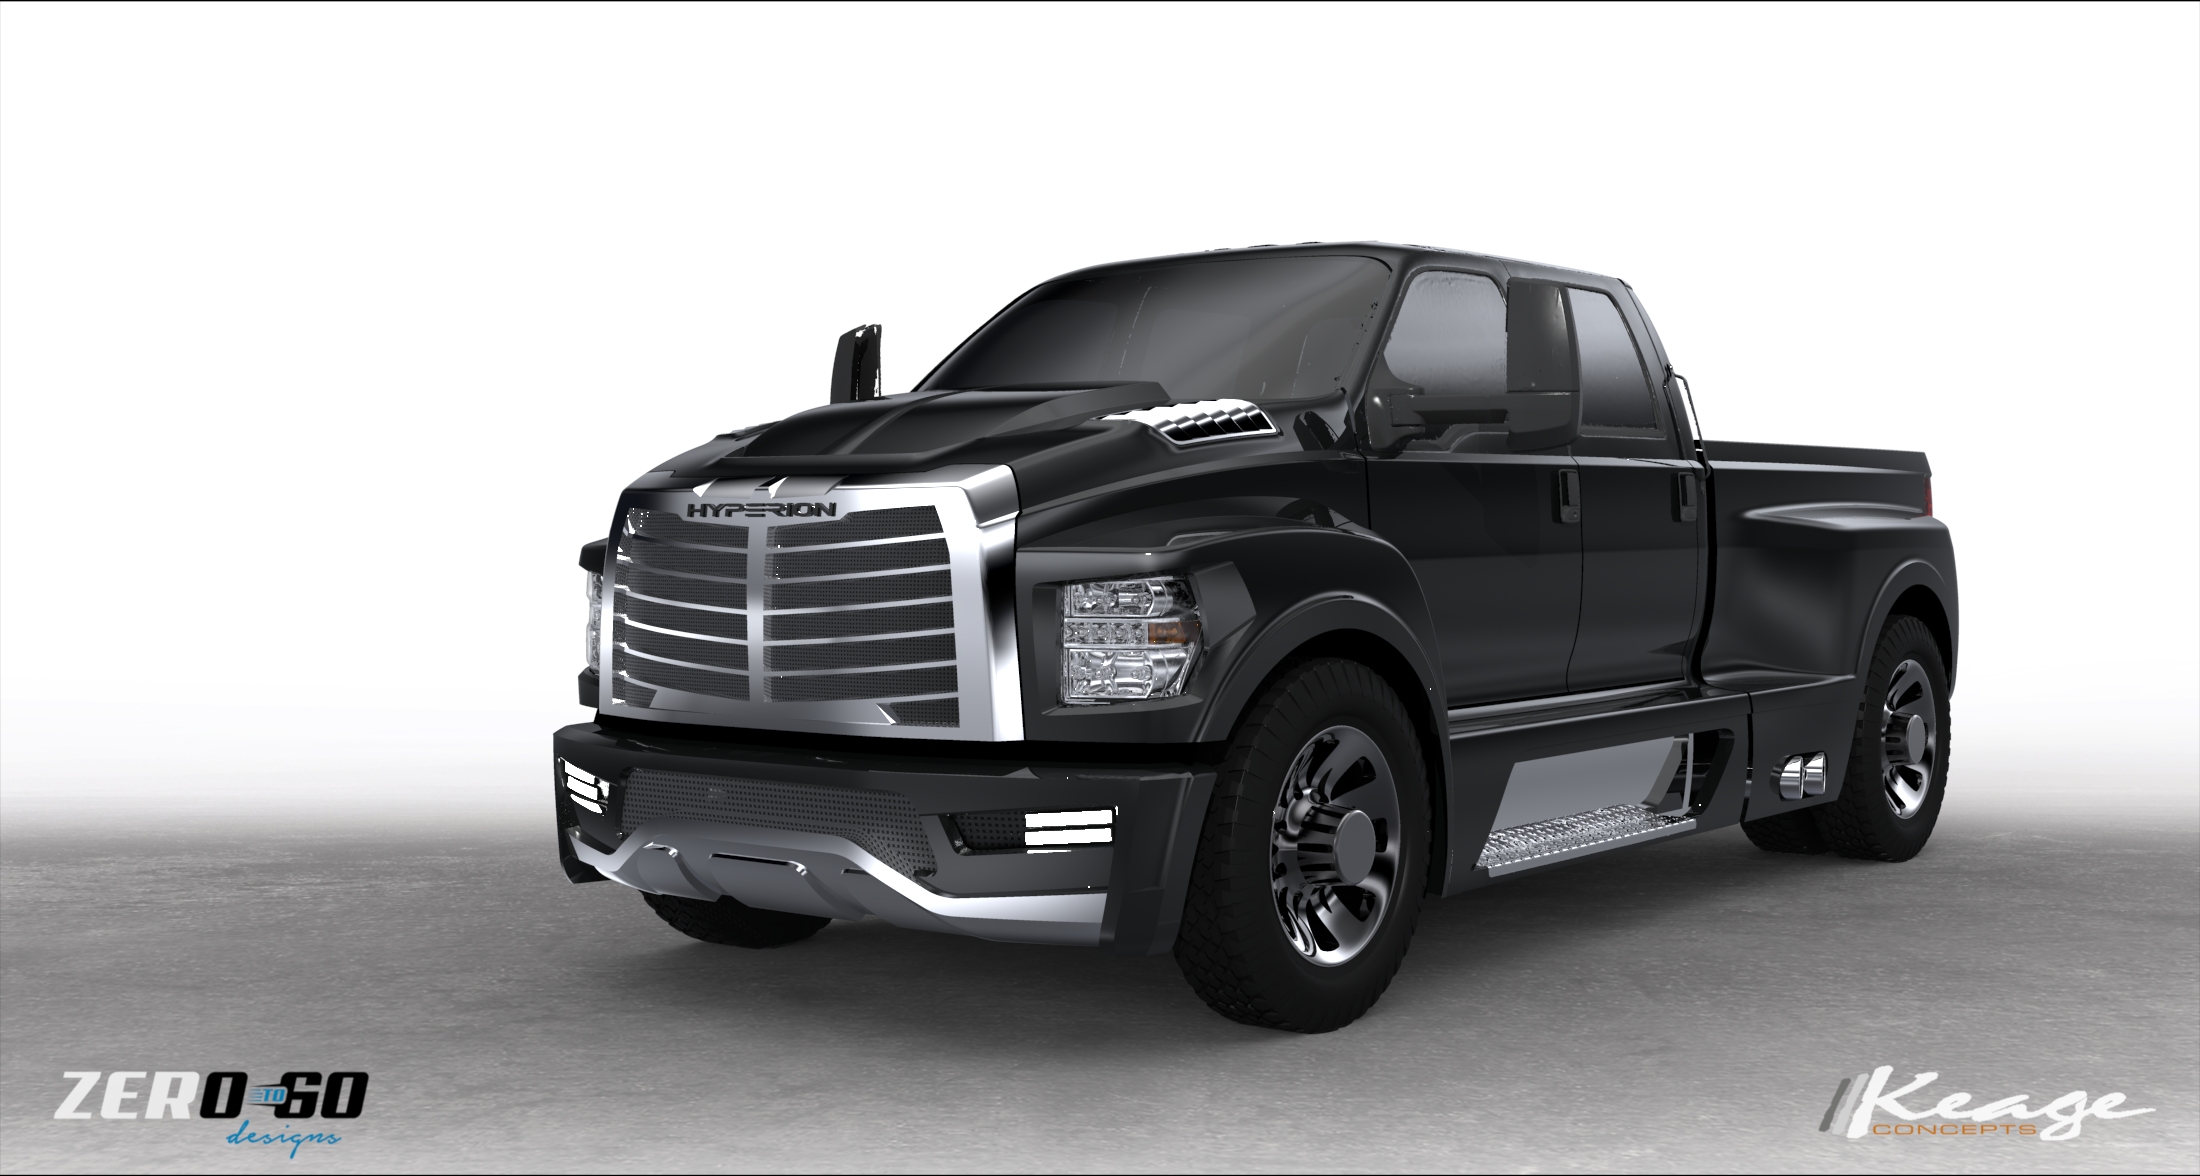 HYPERION F650 Keage Concepts